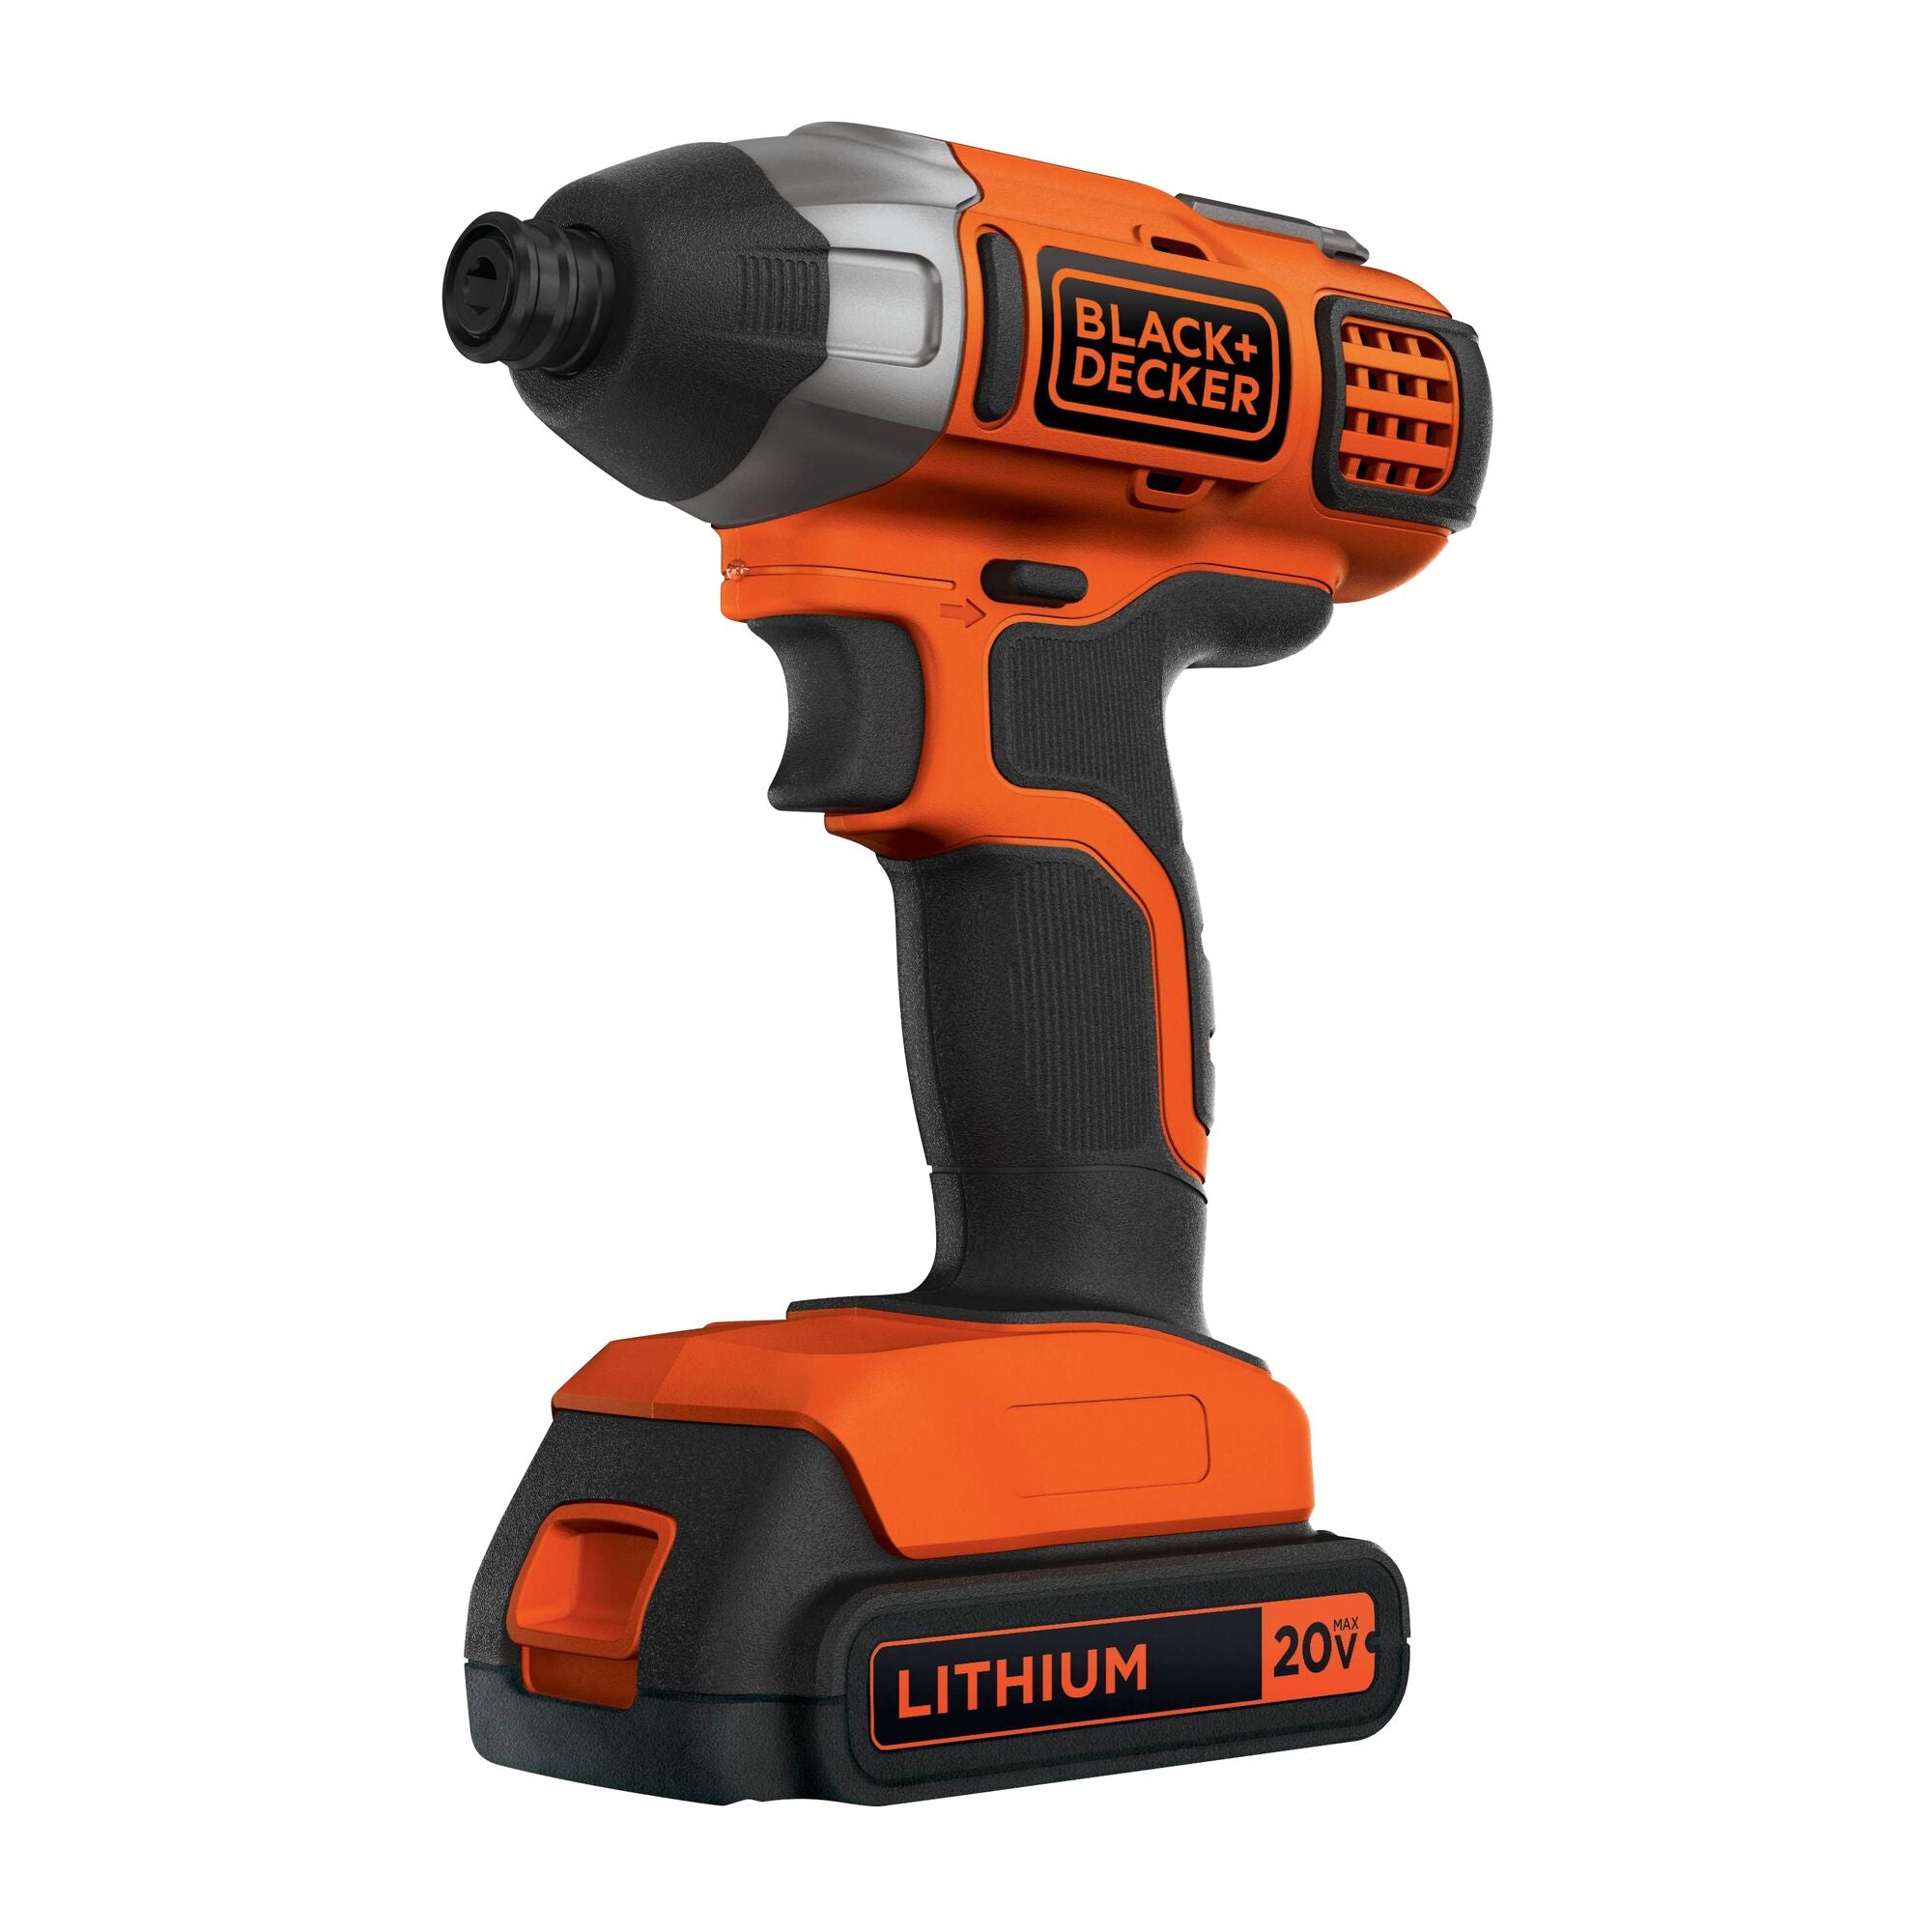 Profile of 20 volt max lithium impact driver battery and charger not included.